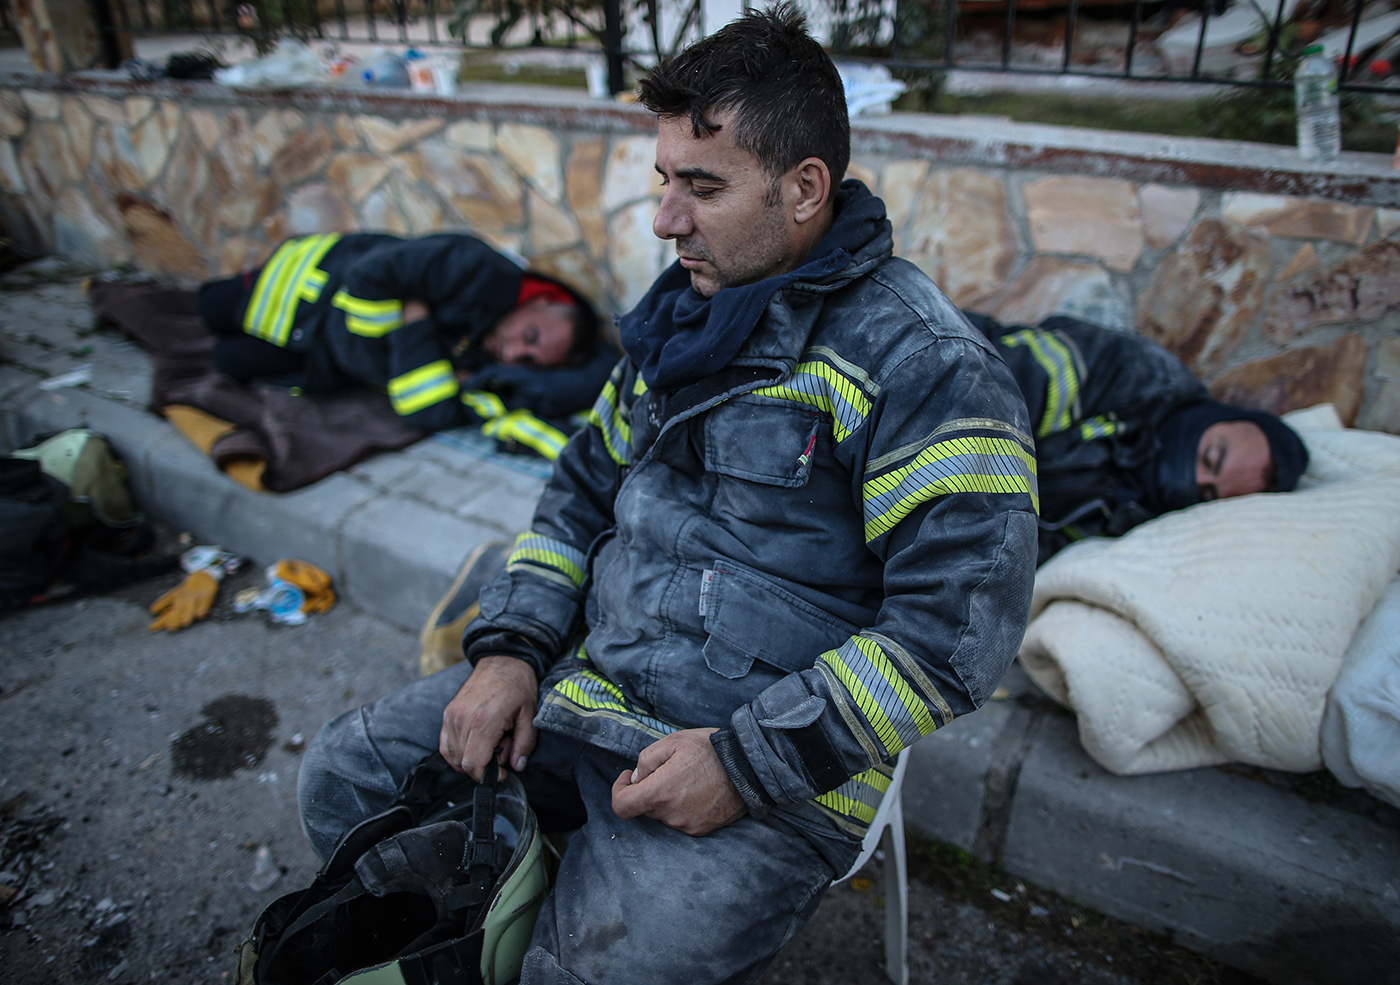 Rescue workers rest around a fire after a 7.0 magnitude earthquake in the Aegean Sea, at Bayrakli district in Izmir, Turkey, 01 November 2020. According to Turkish media reports, at least forty nine people died while more than eight  hundreds were injured and dozens of buildings were destroyed in the earthquake.